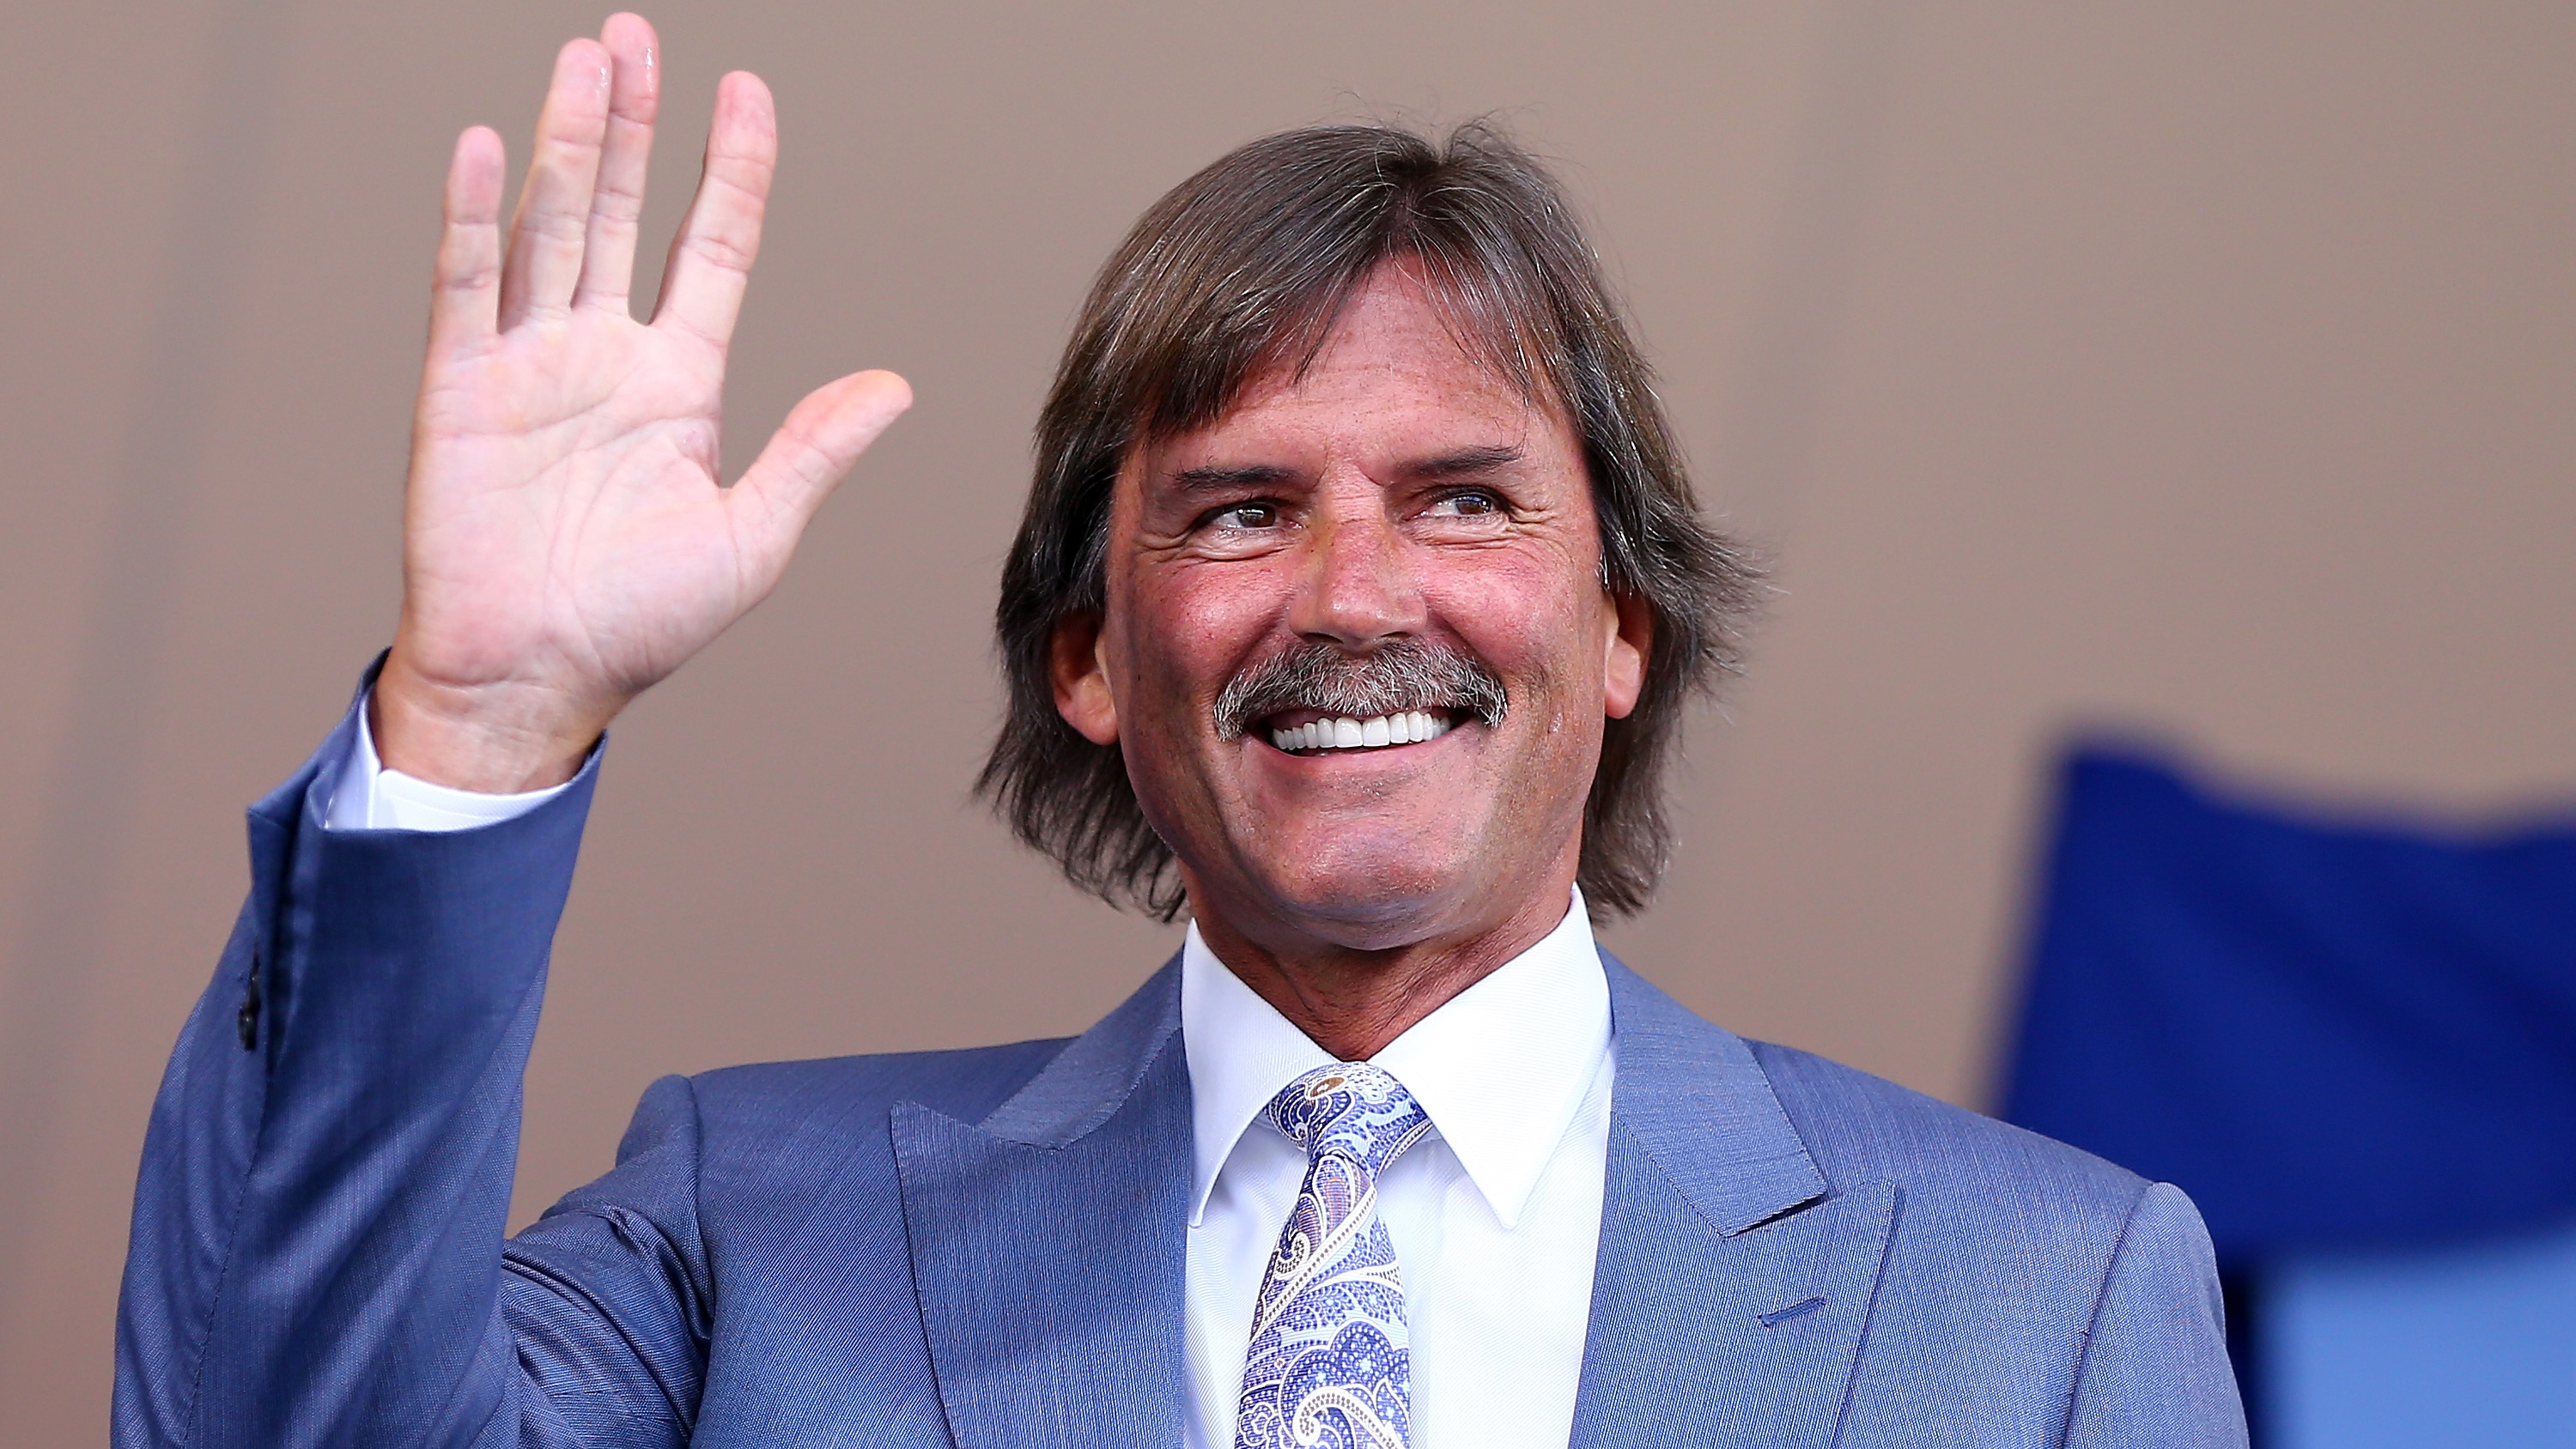 MLB Hall of Fame pitcher, Red Sox broadcaster Dennis Eckersley